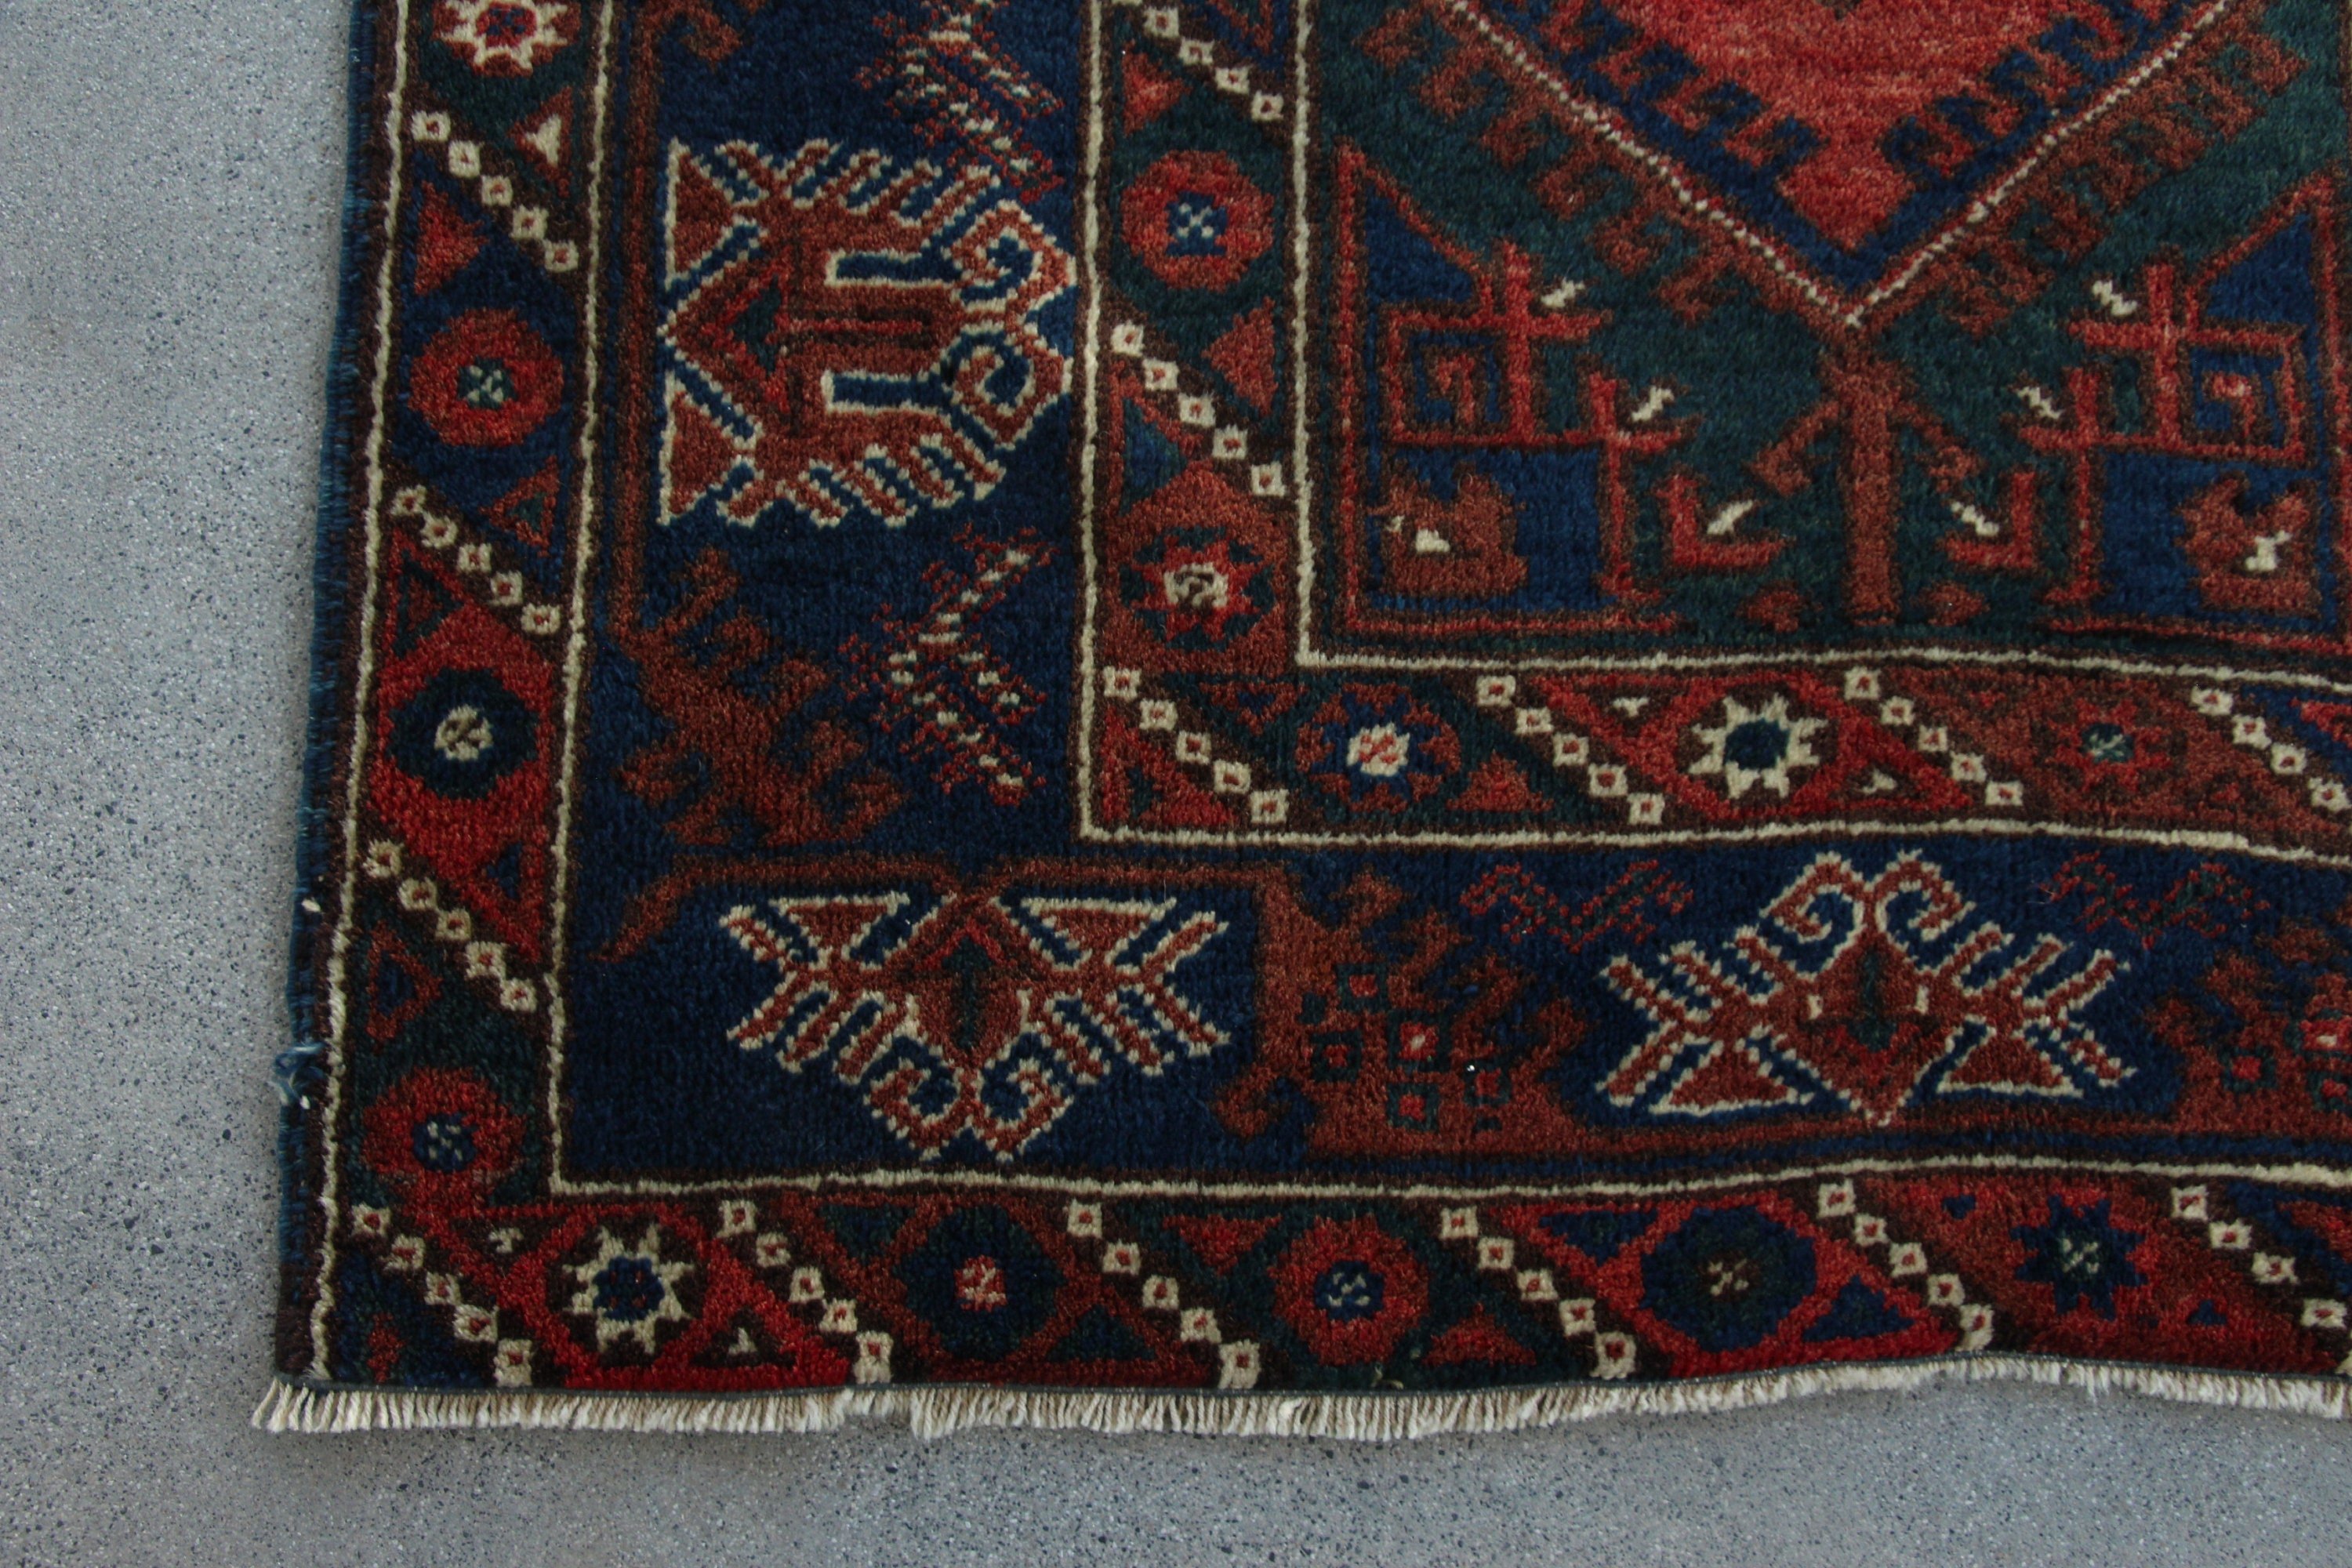 Antique Rug, 3.8x6.6 ft Area Rugs, Vintage Rugs, Turkish Rug, Kitchen Rugs, Rugs for Kitchen, Nursery Rug, Red Antique Rug